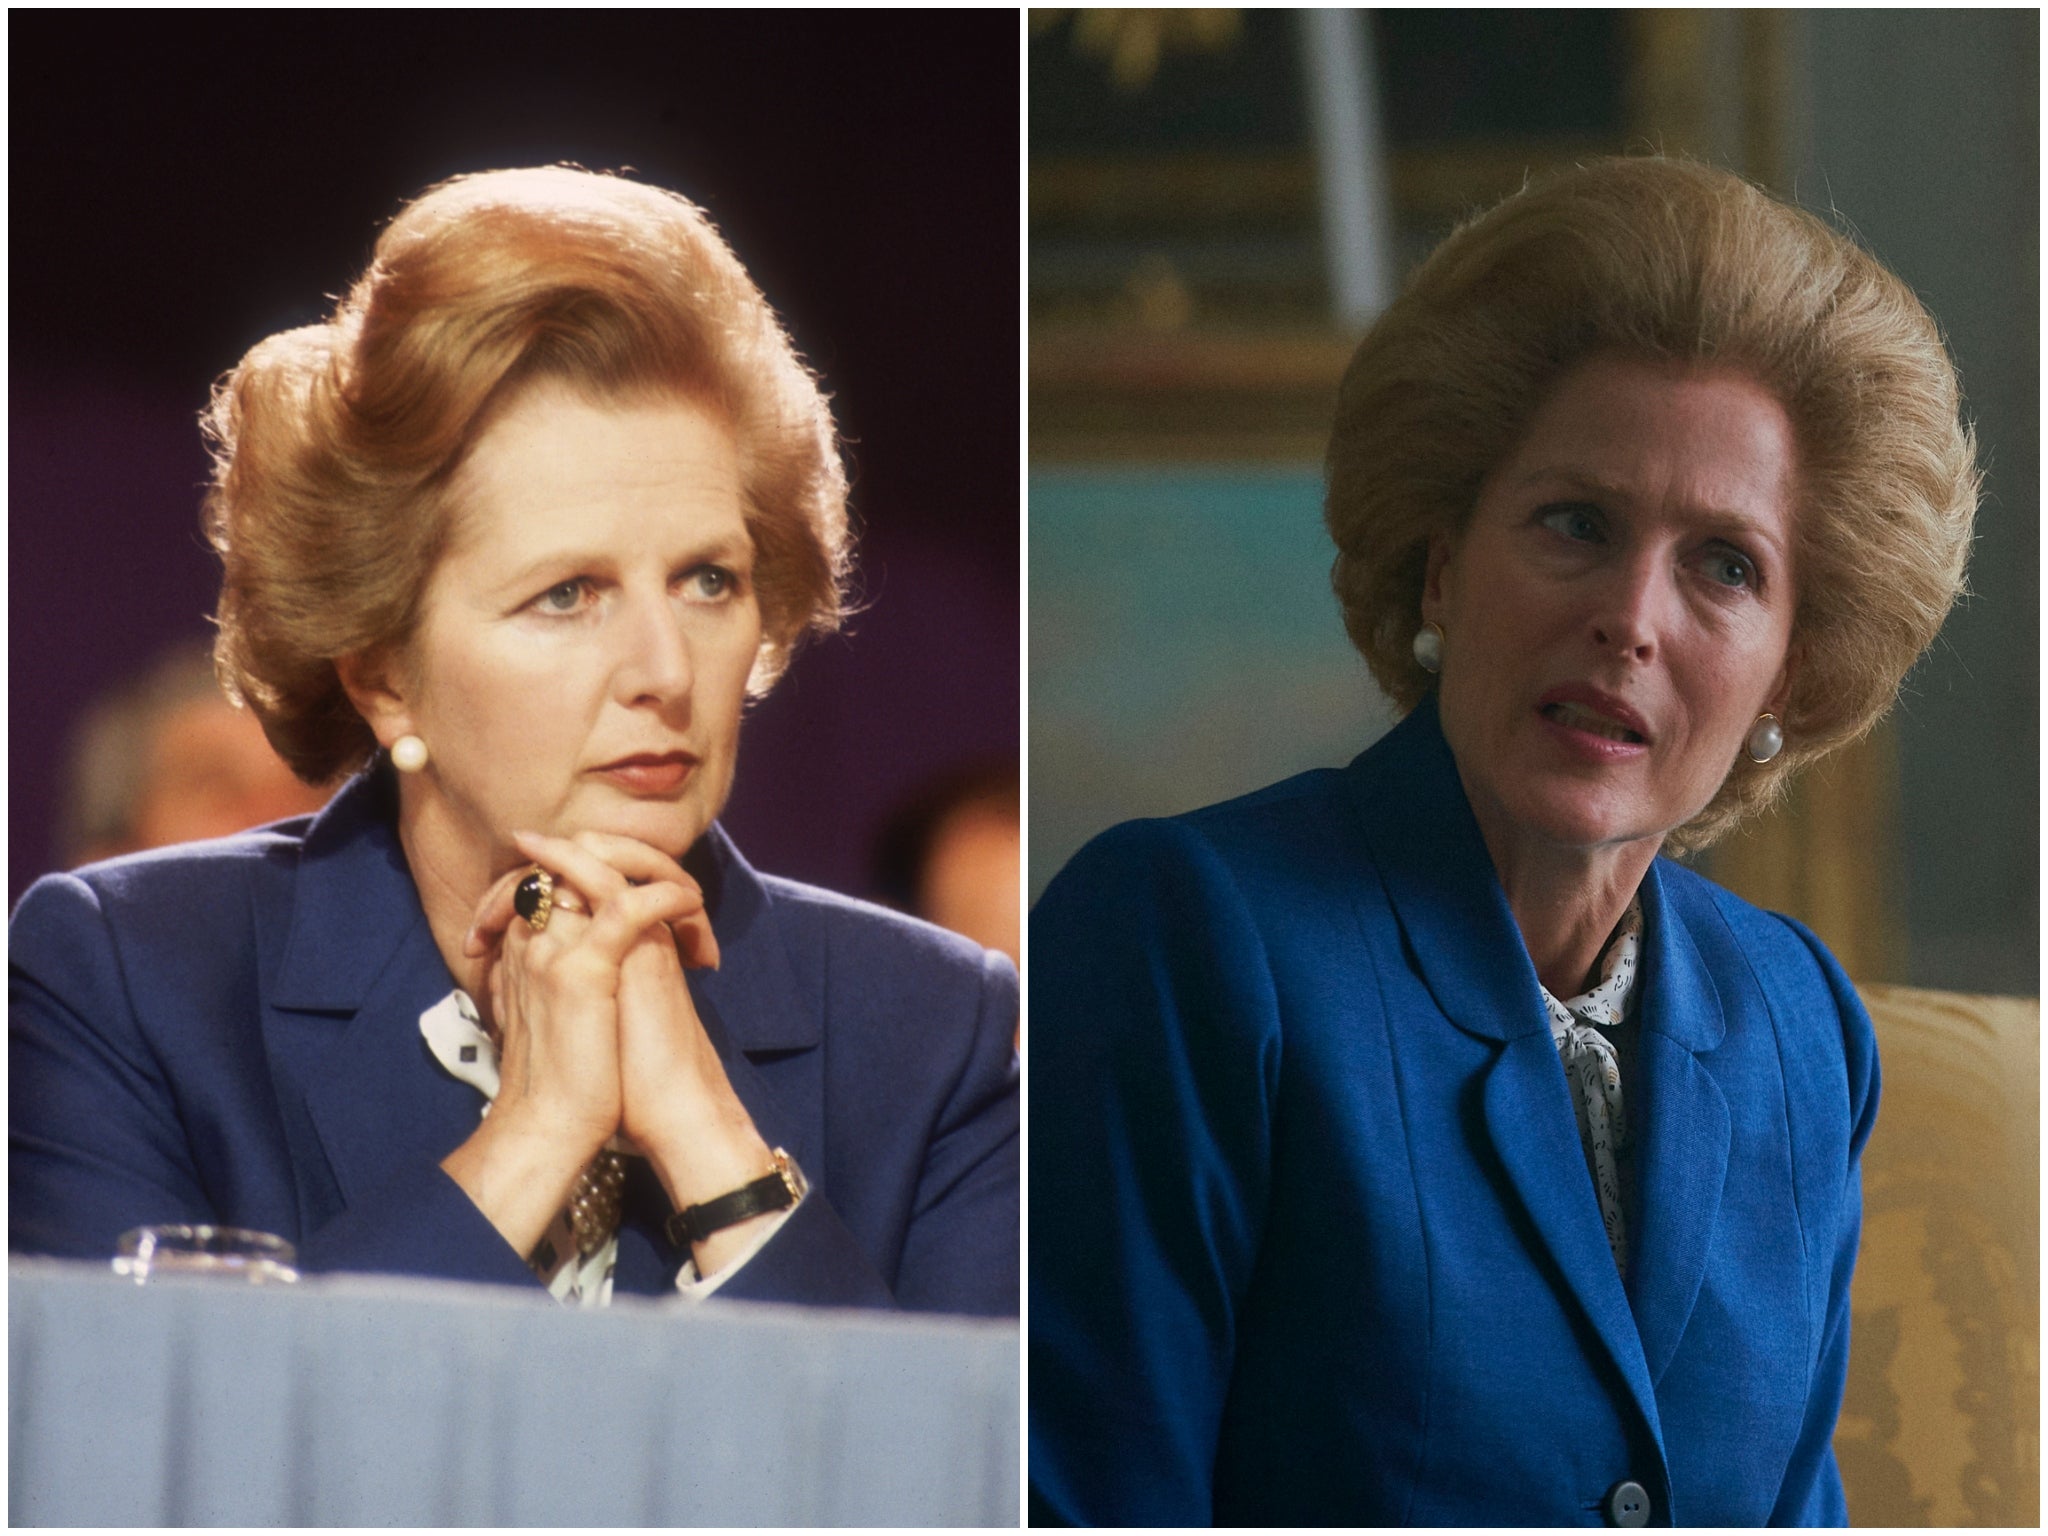 Margaret Thatcher in 1981, Gillian Anderson in ‘The Crown’ season four